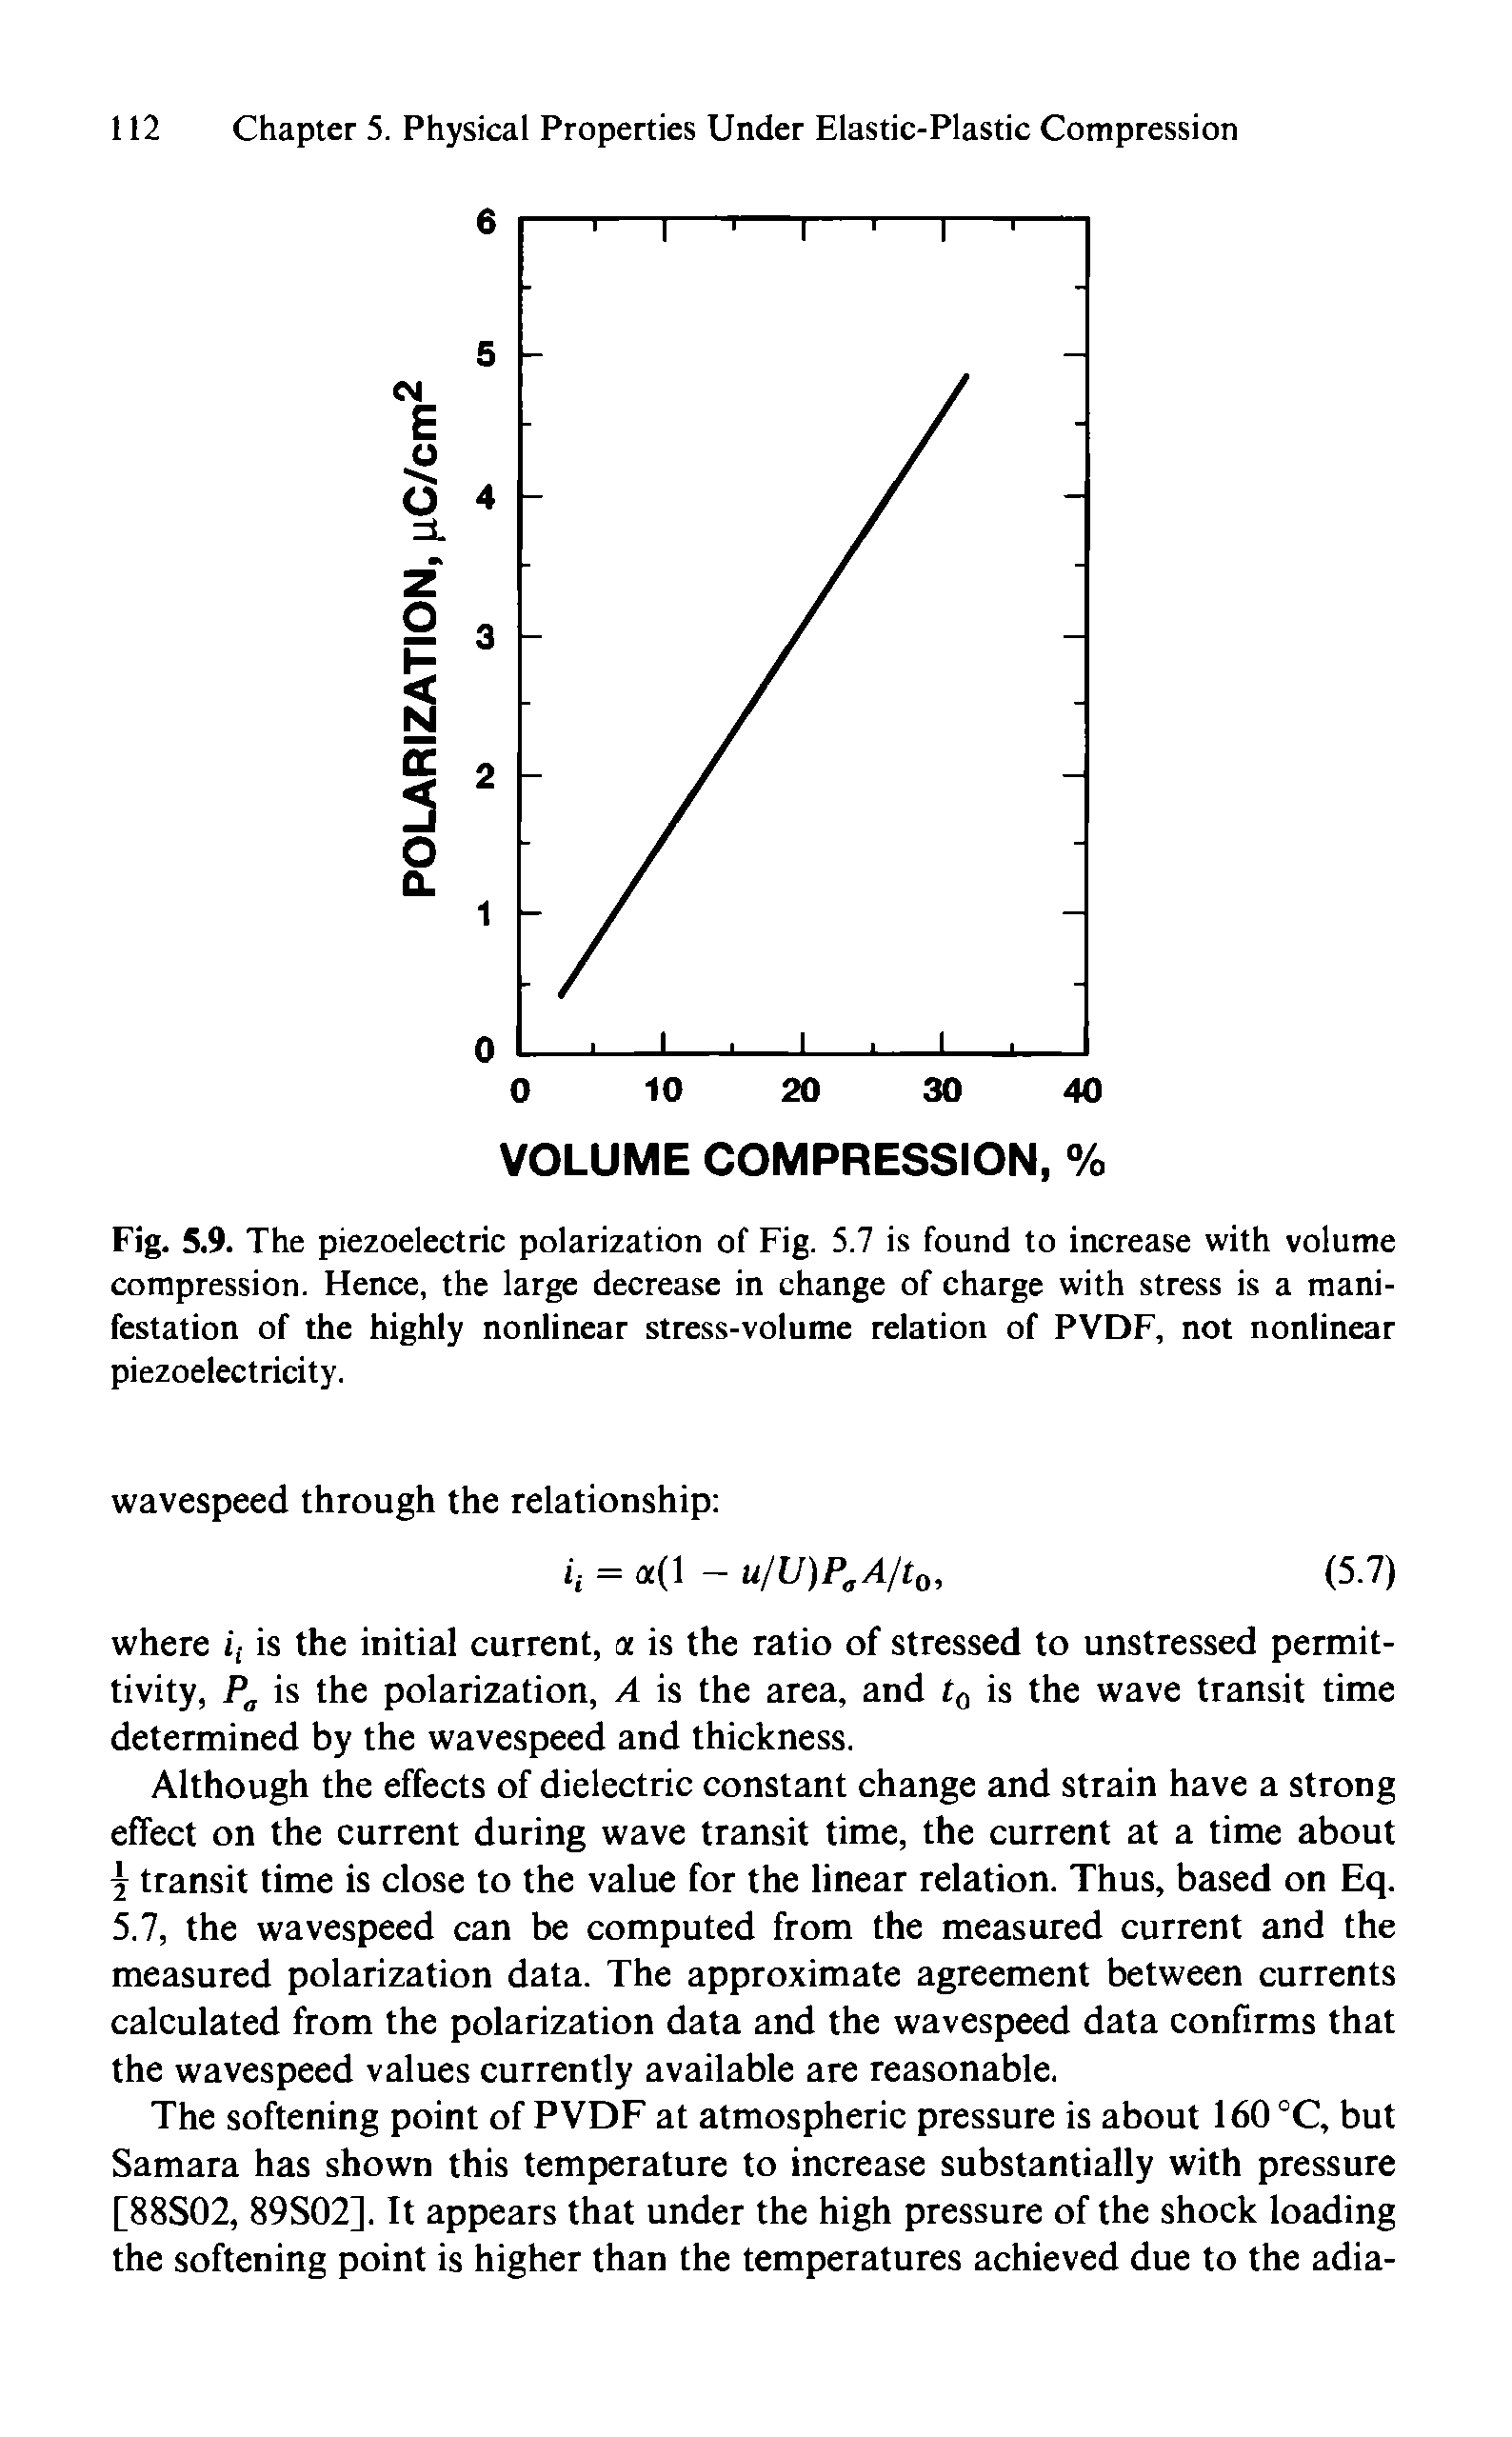 Fig. 5.9. The piezoelectric polarization of Fig. 5.7 is found to increase with volume compression. Hence, the large decrease in change of charge with stress is a manifestation of the highly nonlinear stress-volume relation of PVDF, not nonlinear piezoelectricity.